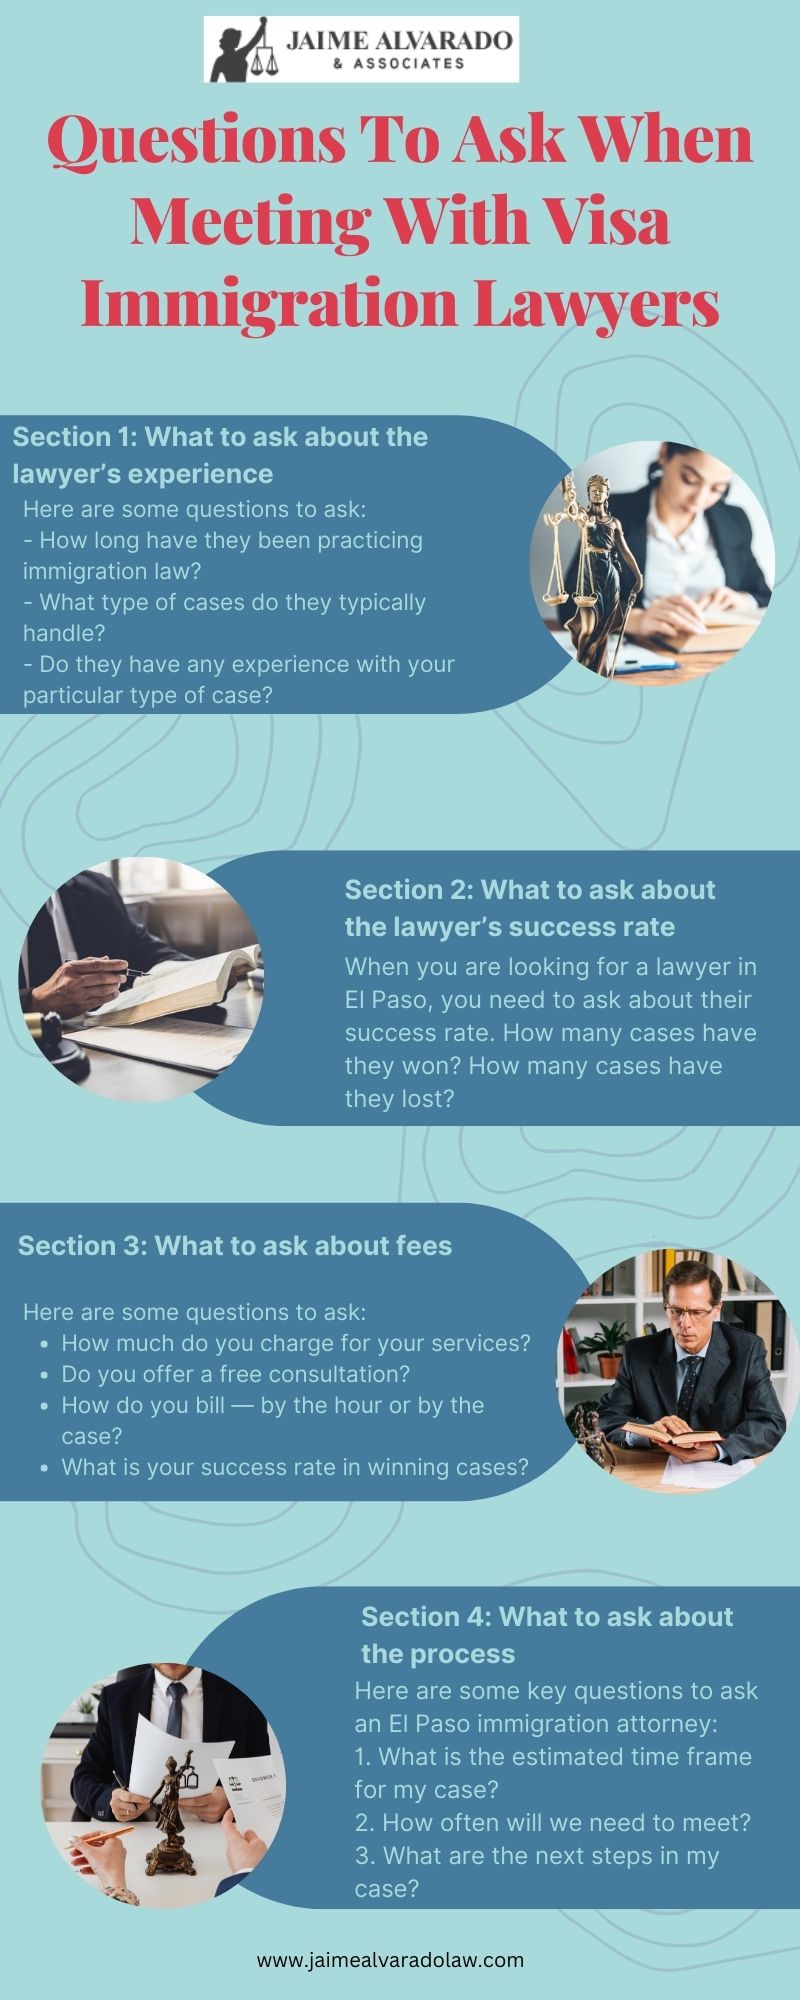 Questions To Ask When Meeting With Visa Immigration Lawyers